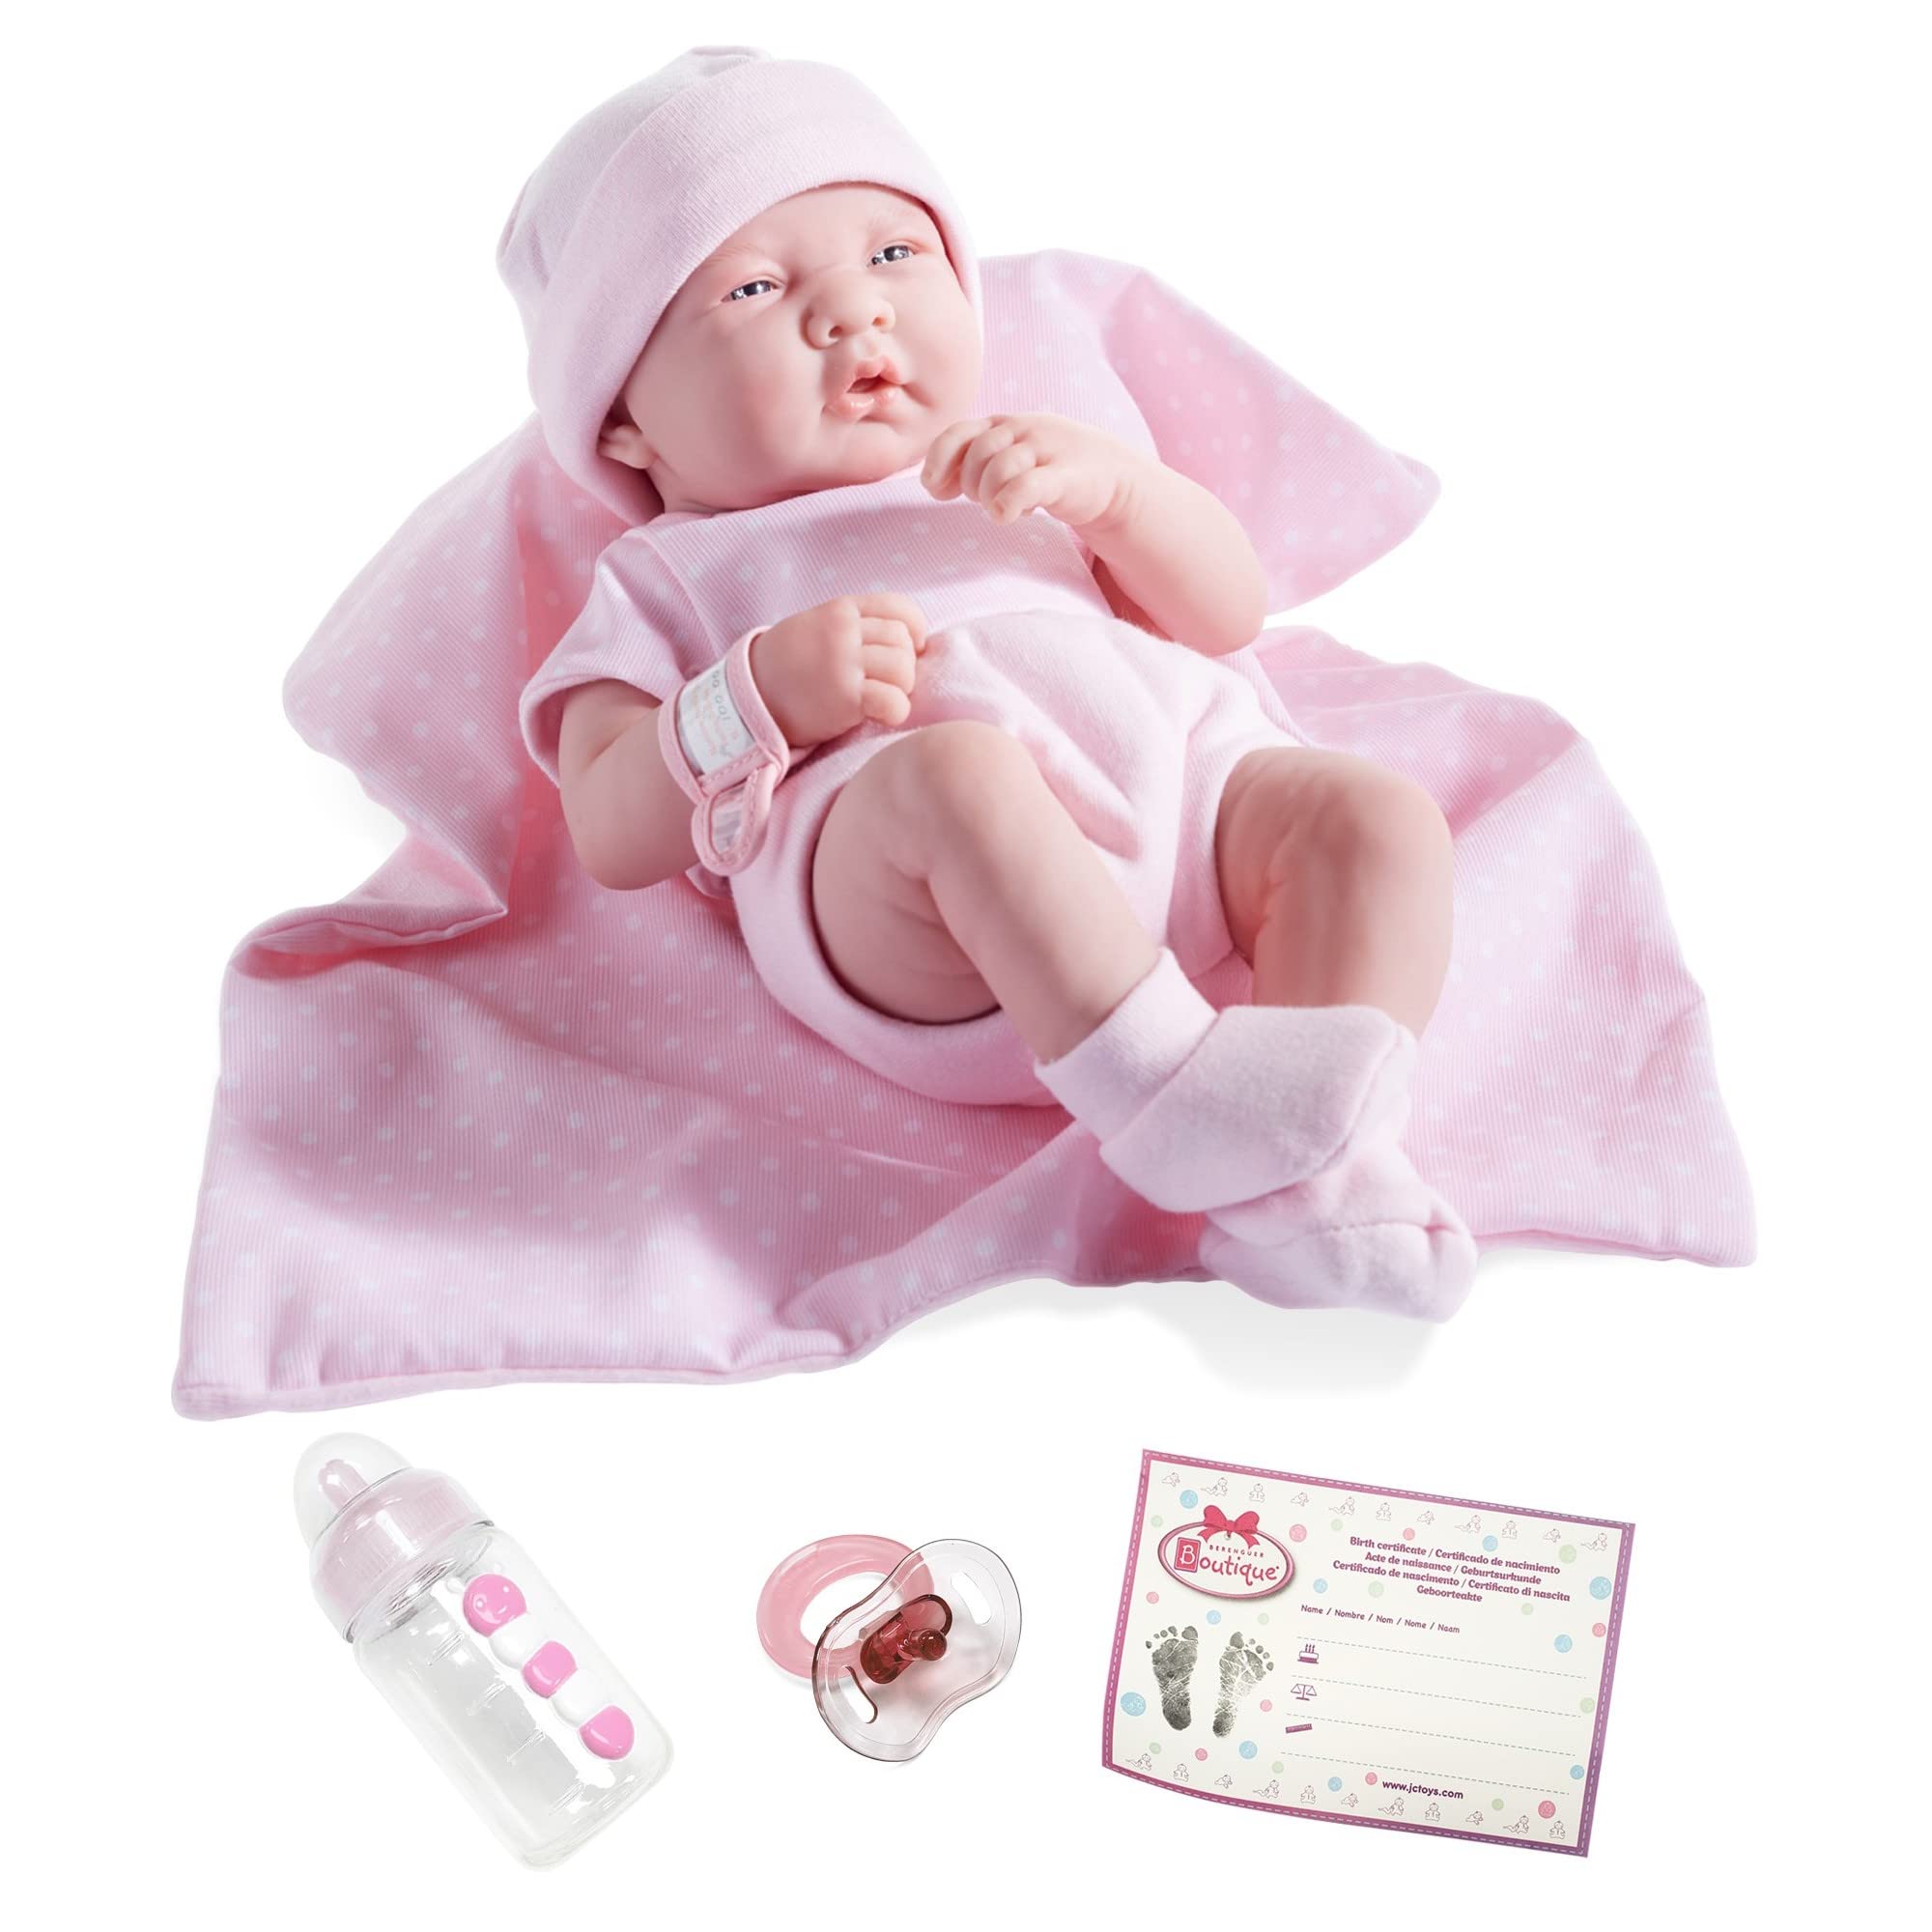 JC Toys 18541 La Newborn Boutique 14 Inch Doll, 9 Piece Set, Real Girl in Pink